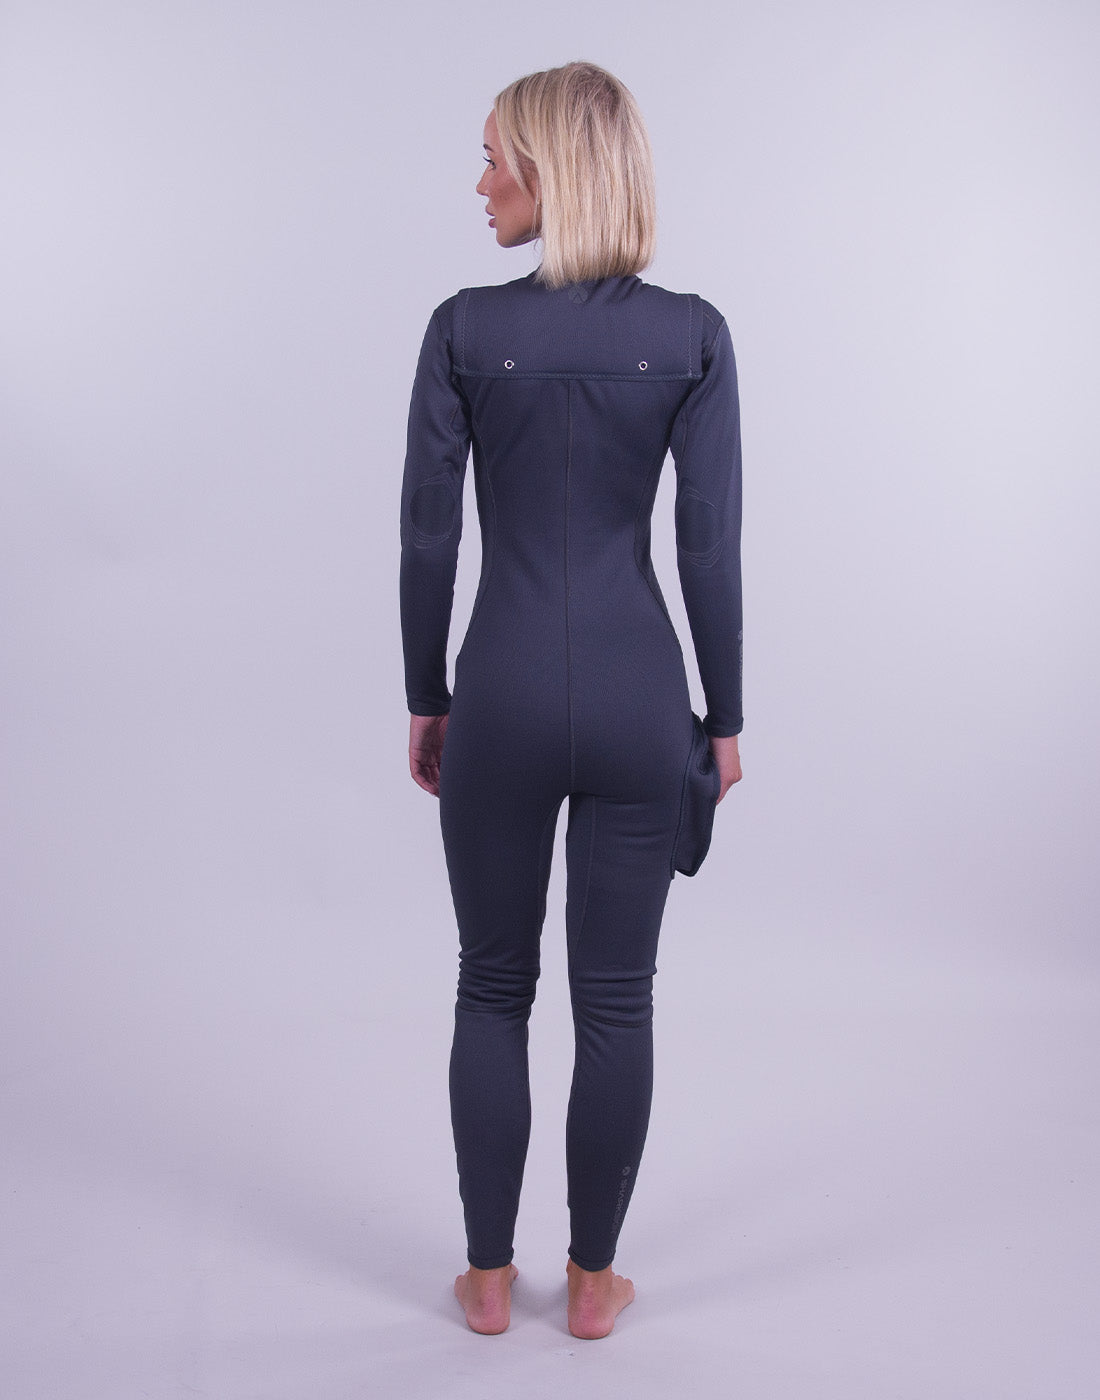 T2 CHILLPROOF SUIT CHEST ZIP - WOMENS